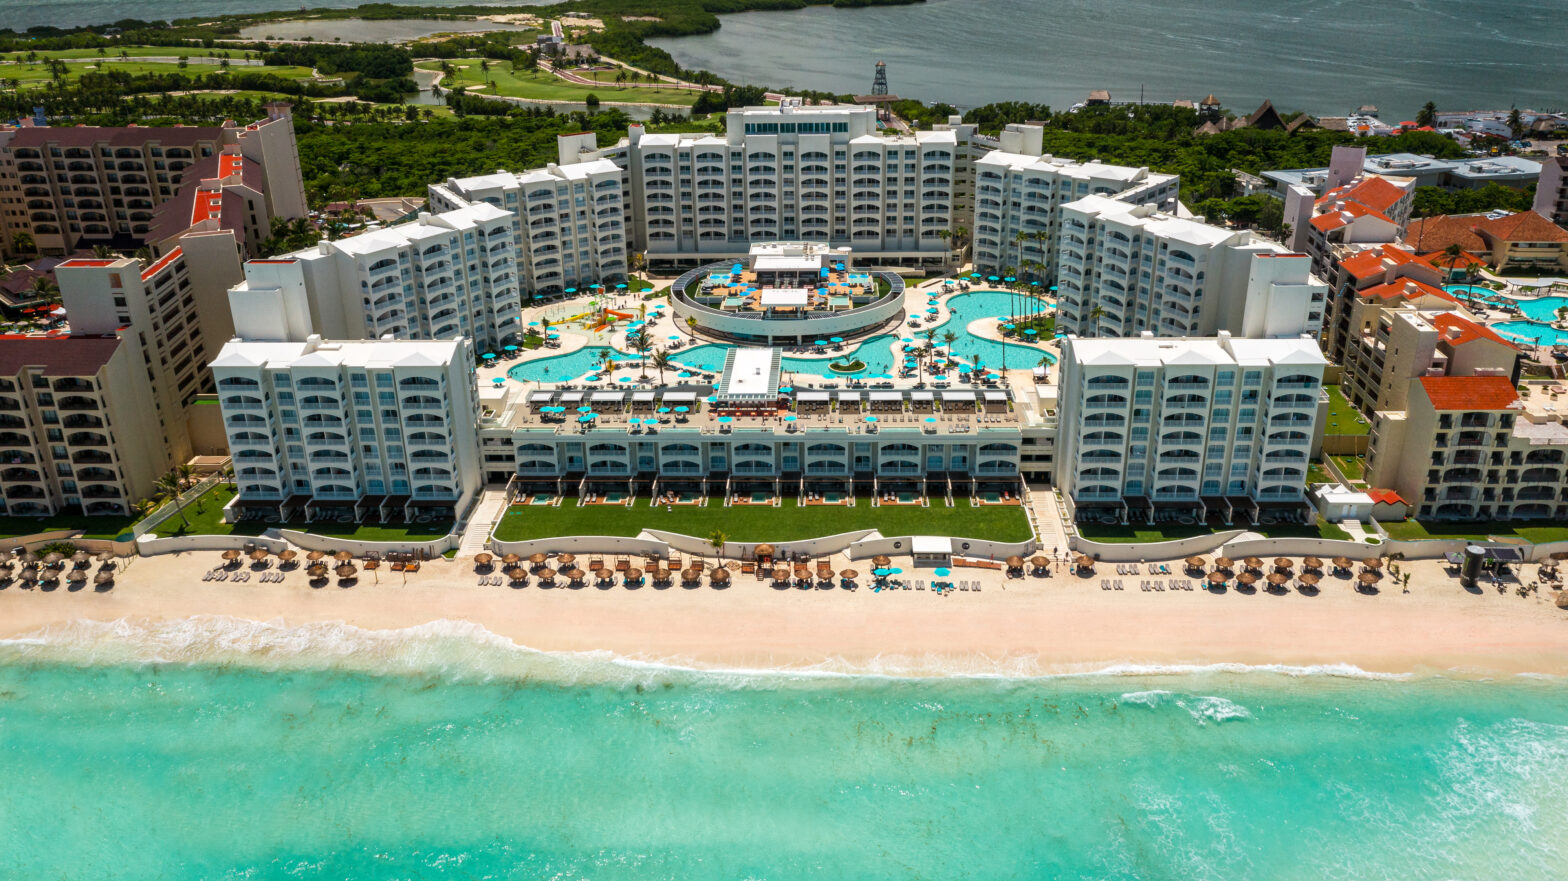 Hilton To Open A New All-Inclusive Resort in Cancun